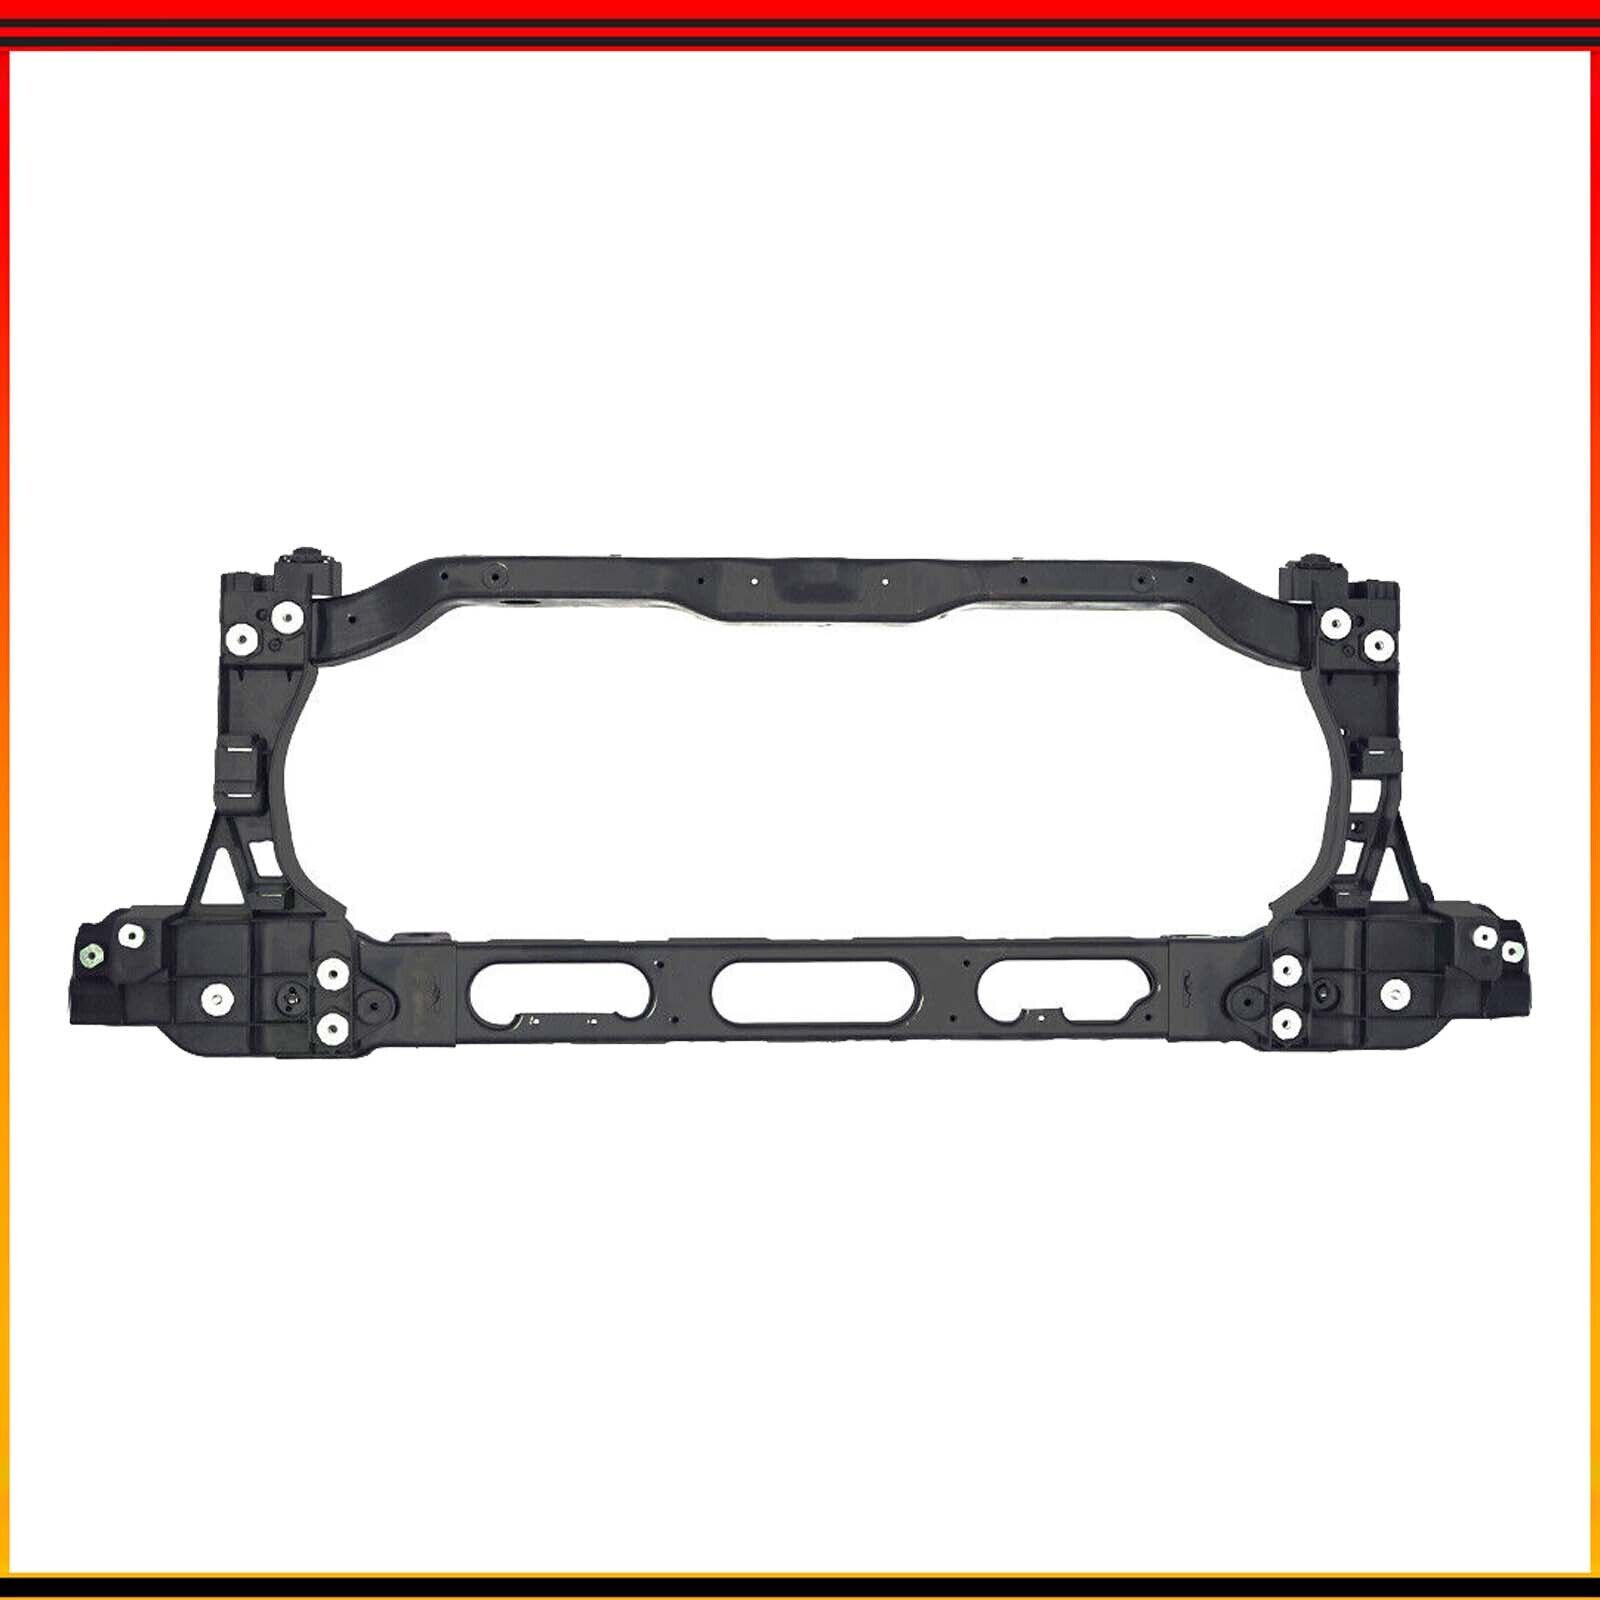 68403786AD NEW REPLACEMENT FRONT RADIATOR SUPPORT FOR 2019-2022 DODGE RAM 1500